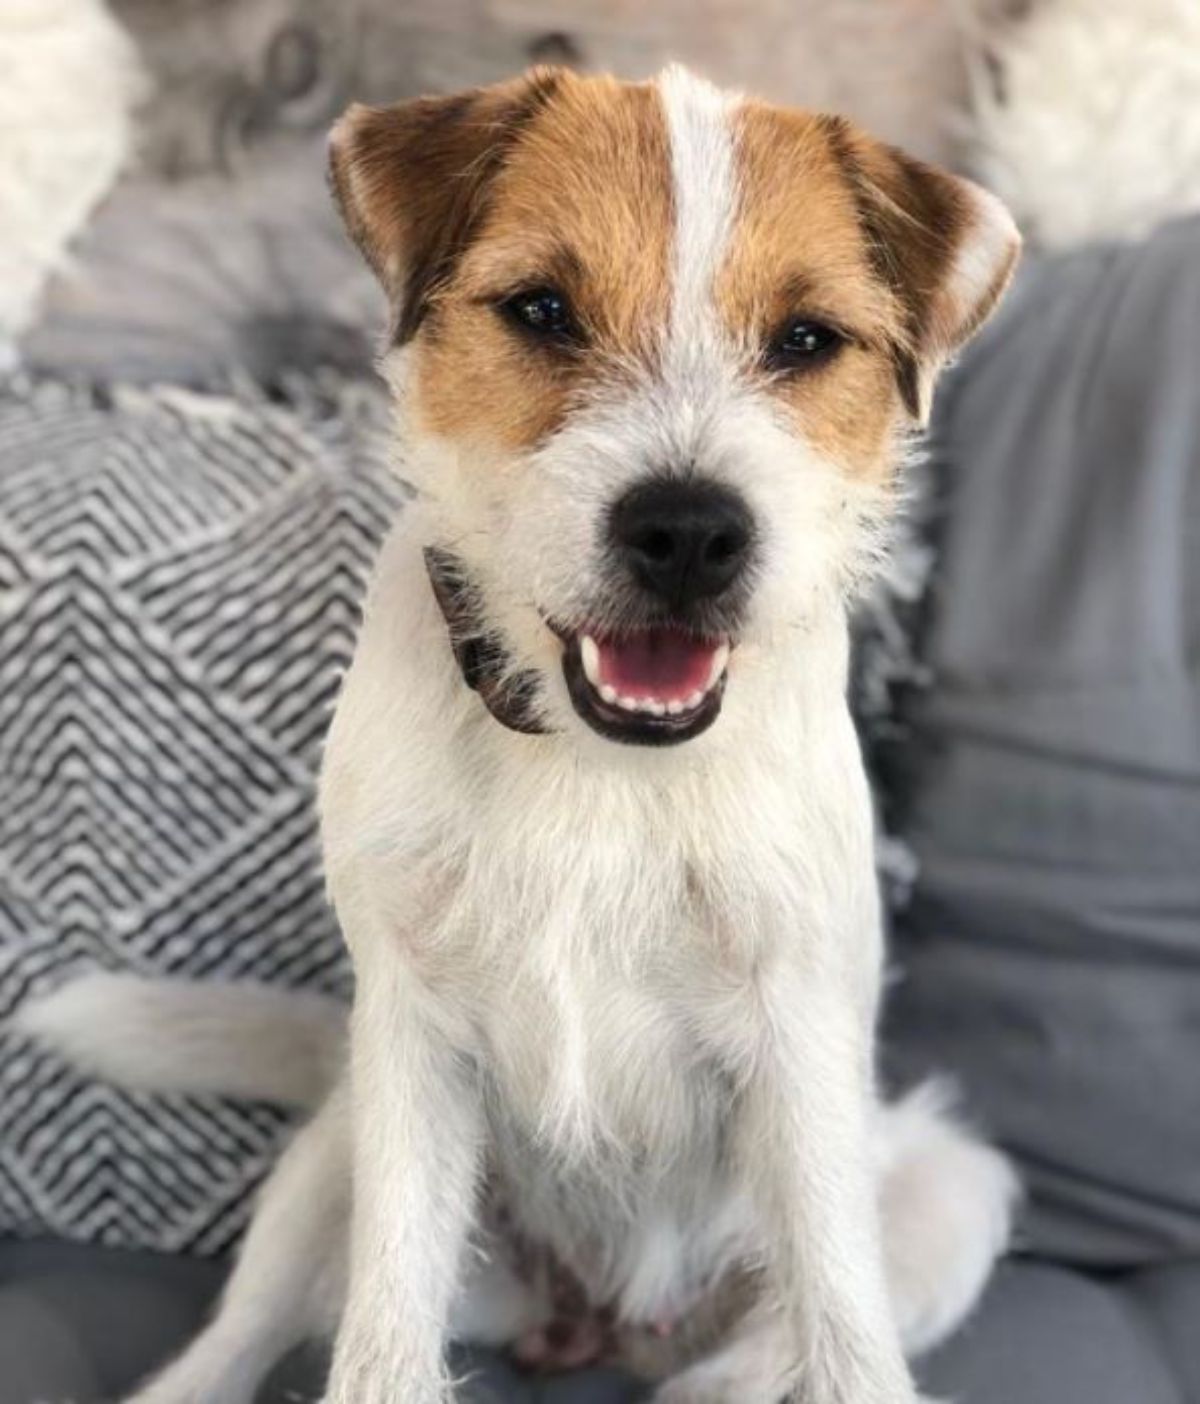 Parson Russell Terrier sitting on the couch